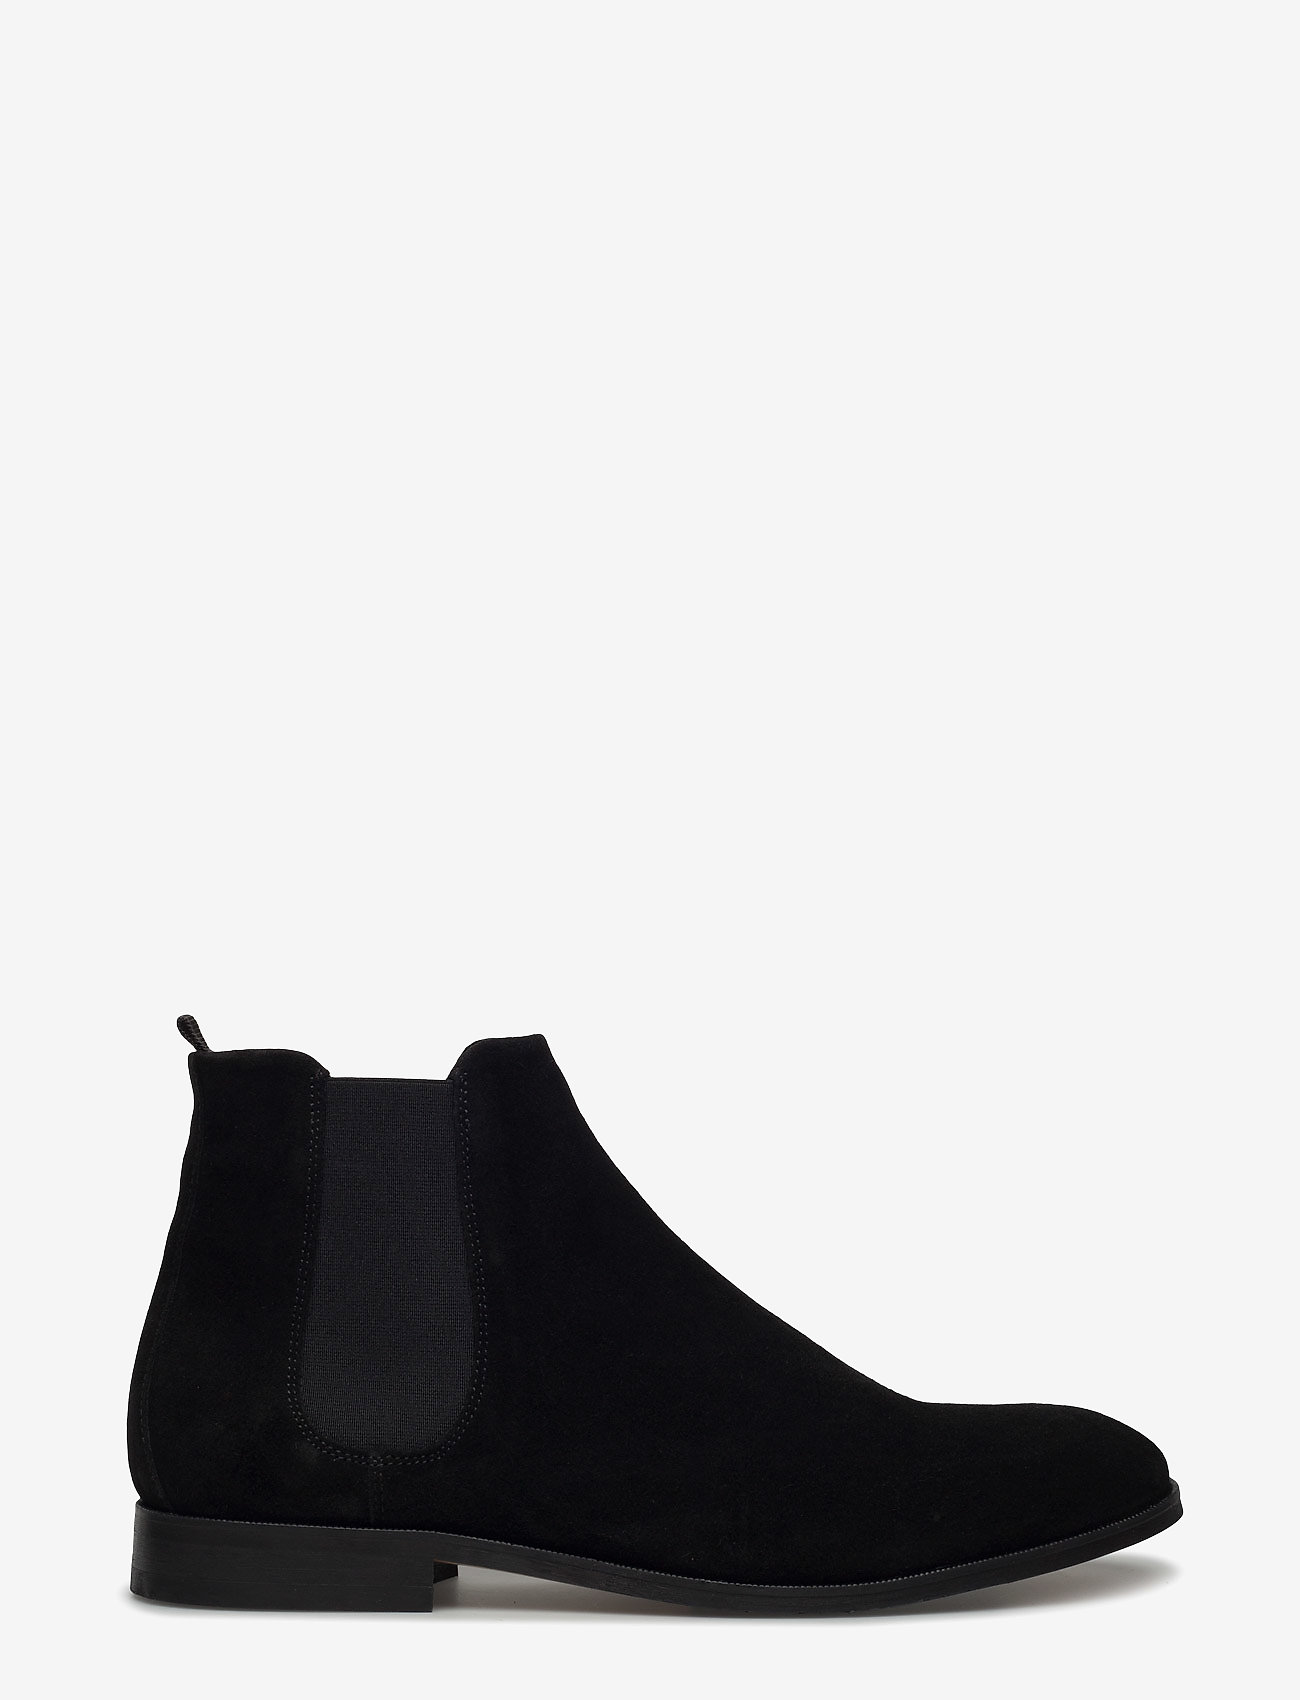 the classic black chelsea boots